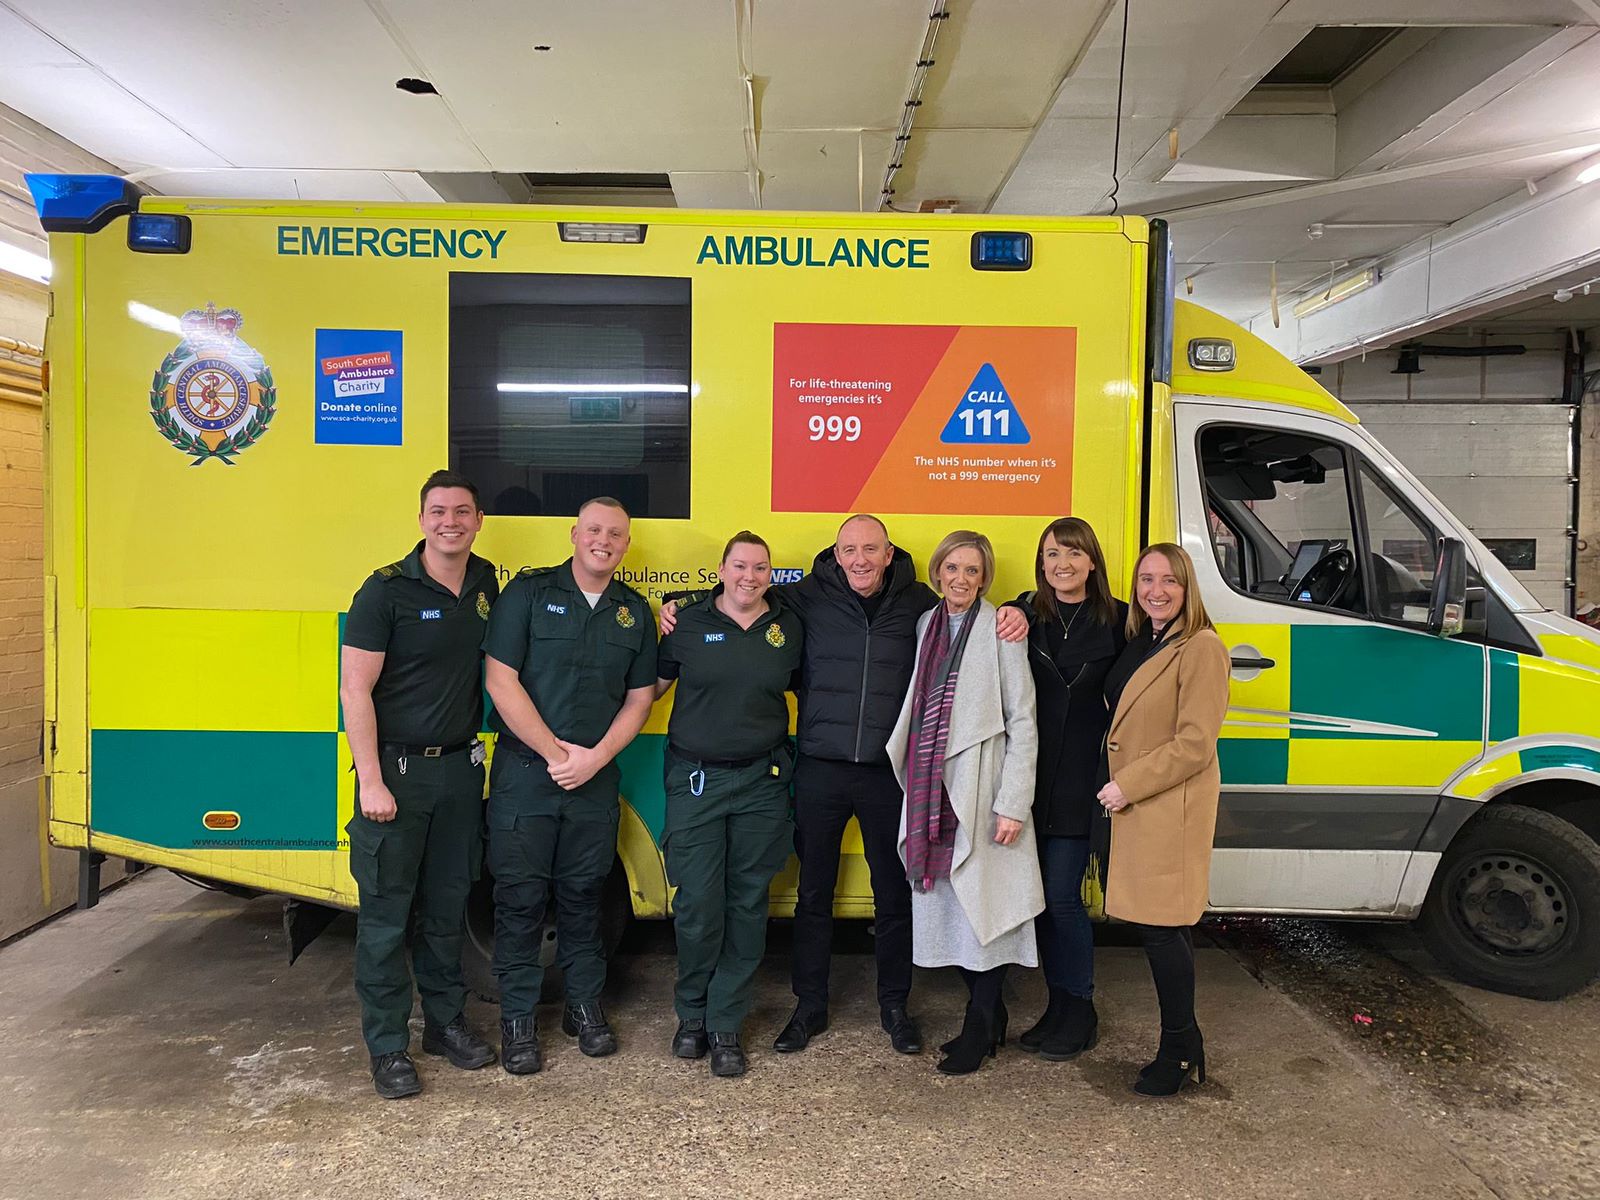 Group of seven people standing in front of an ambulance